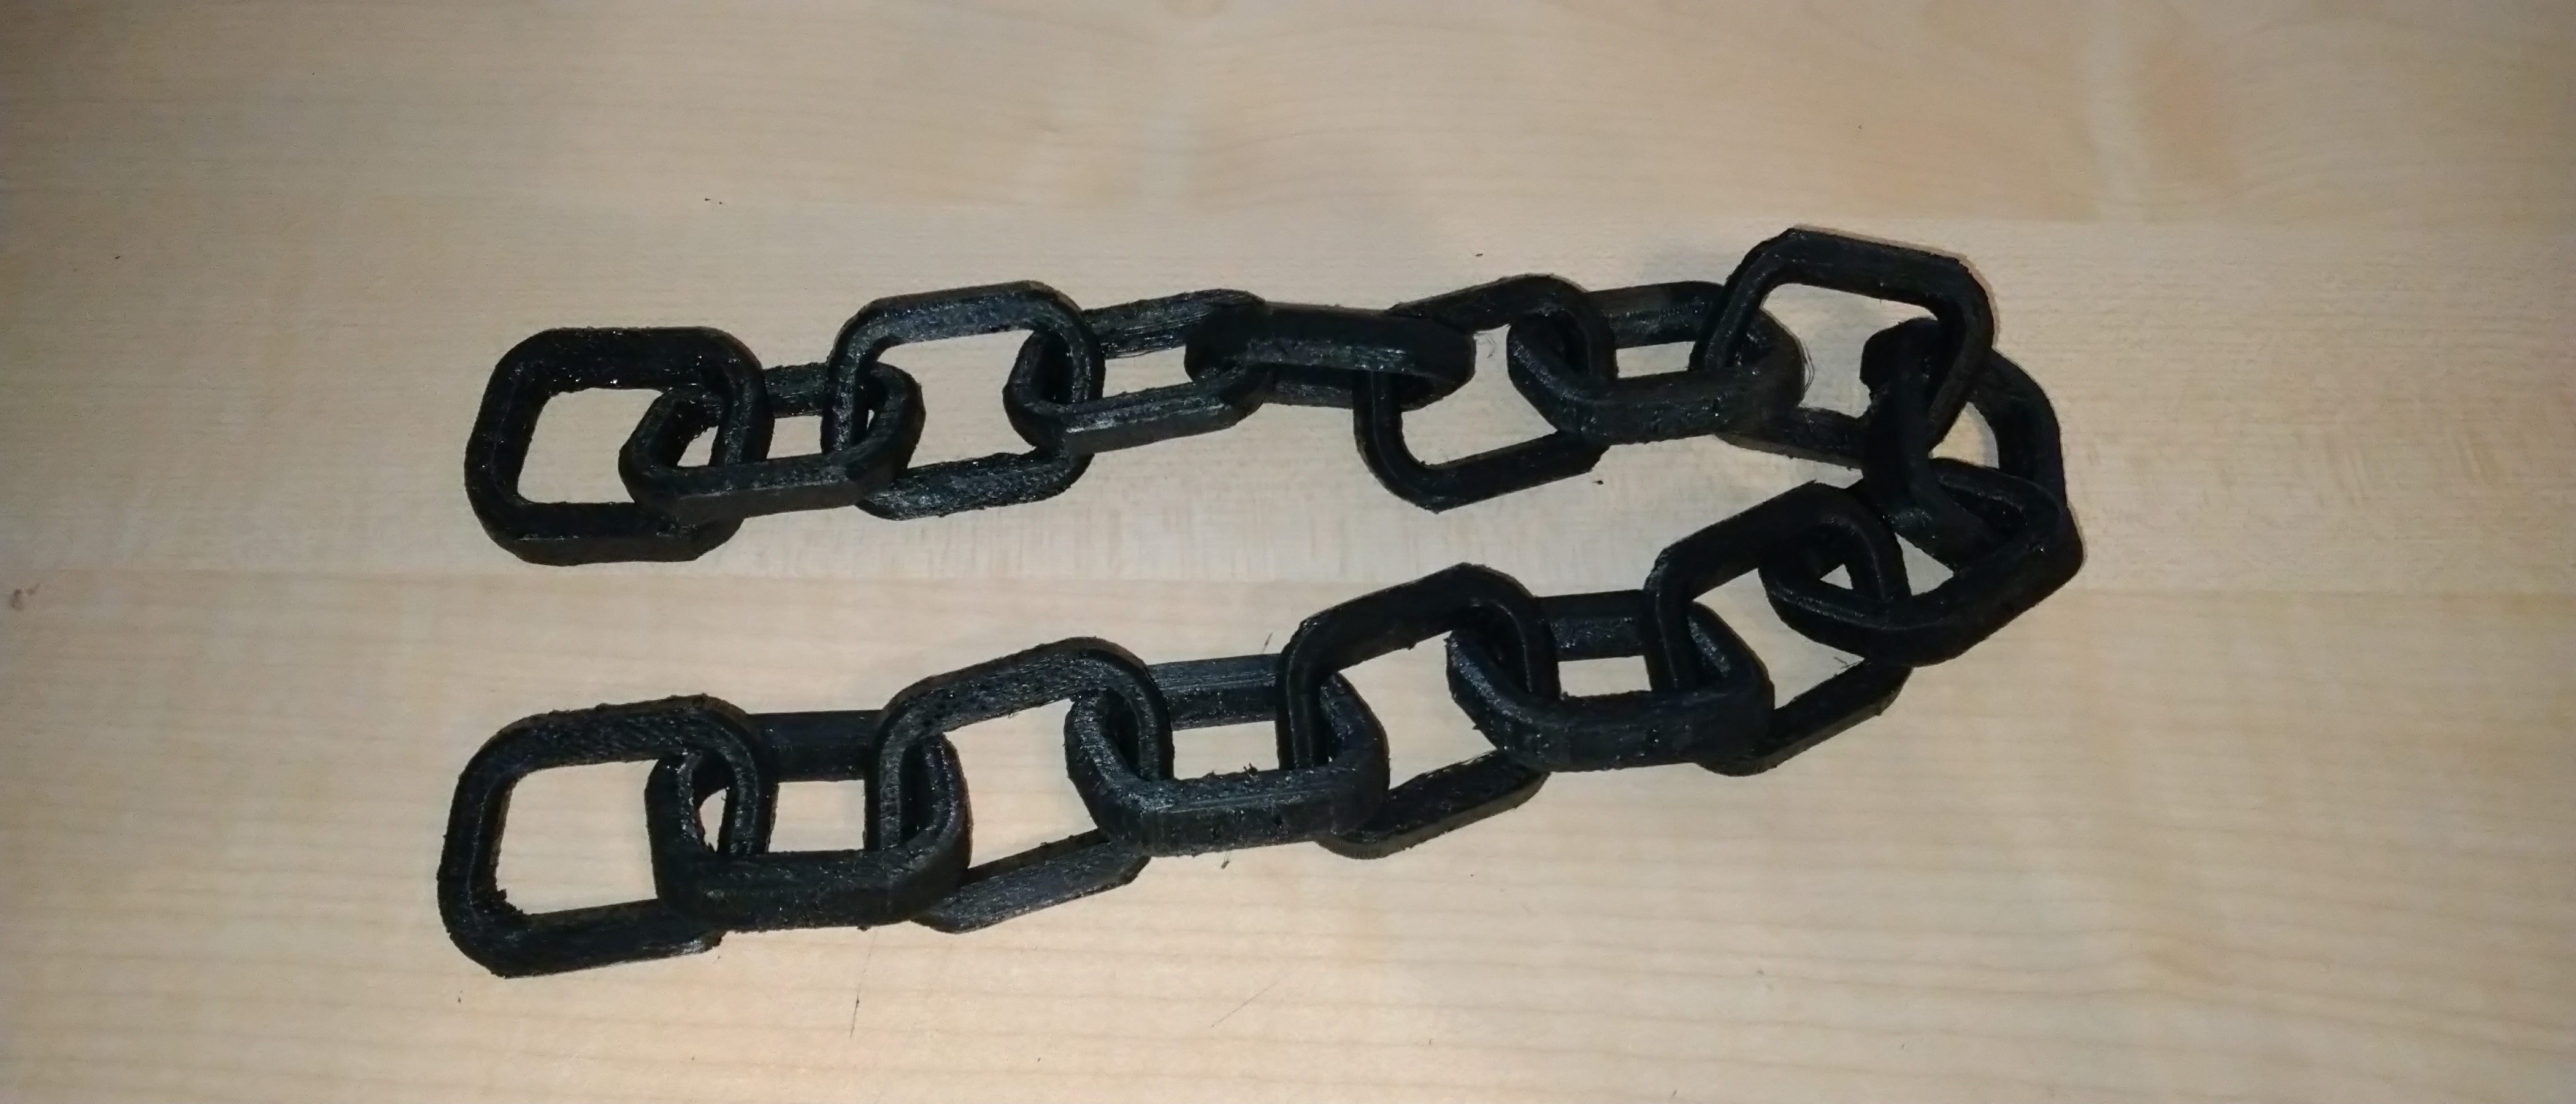 3D Chain - Print in place